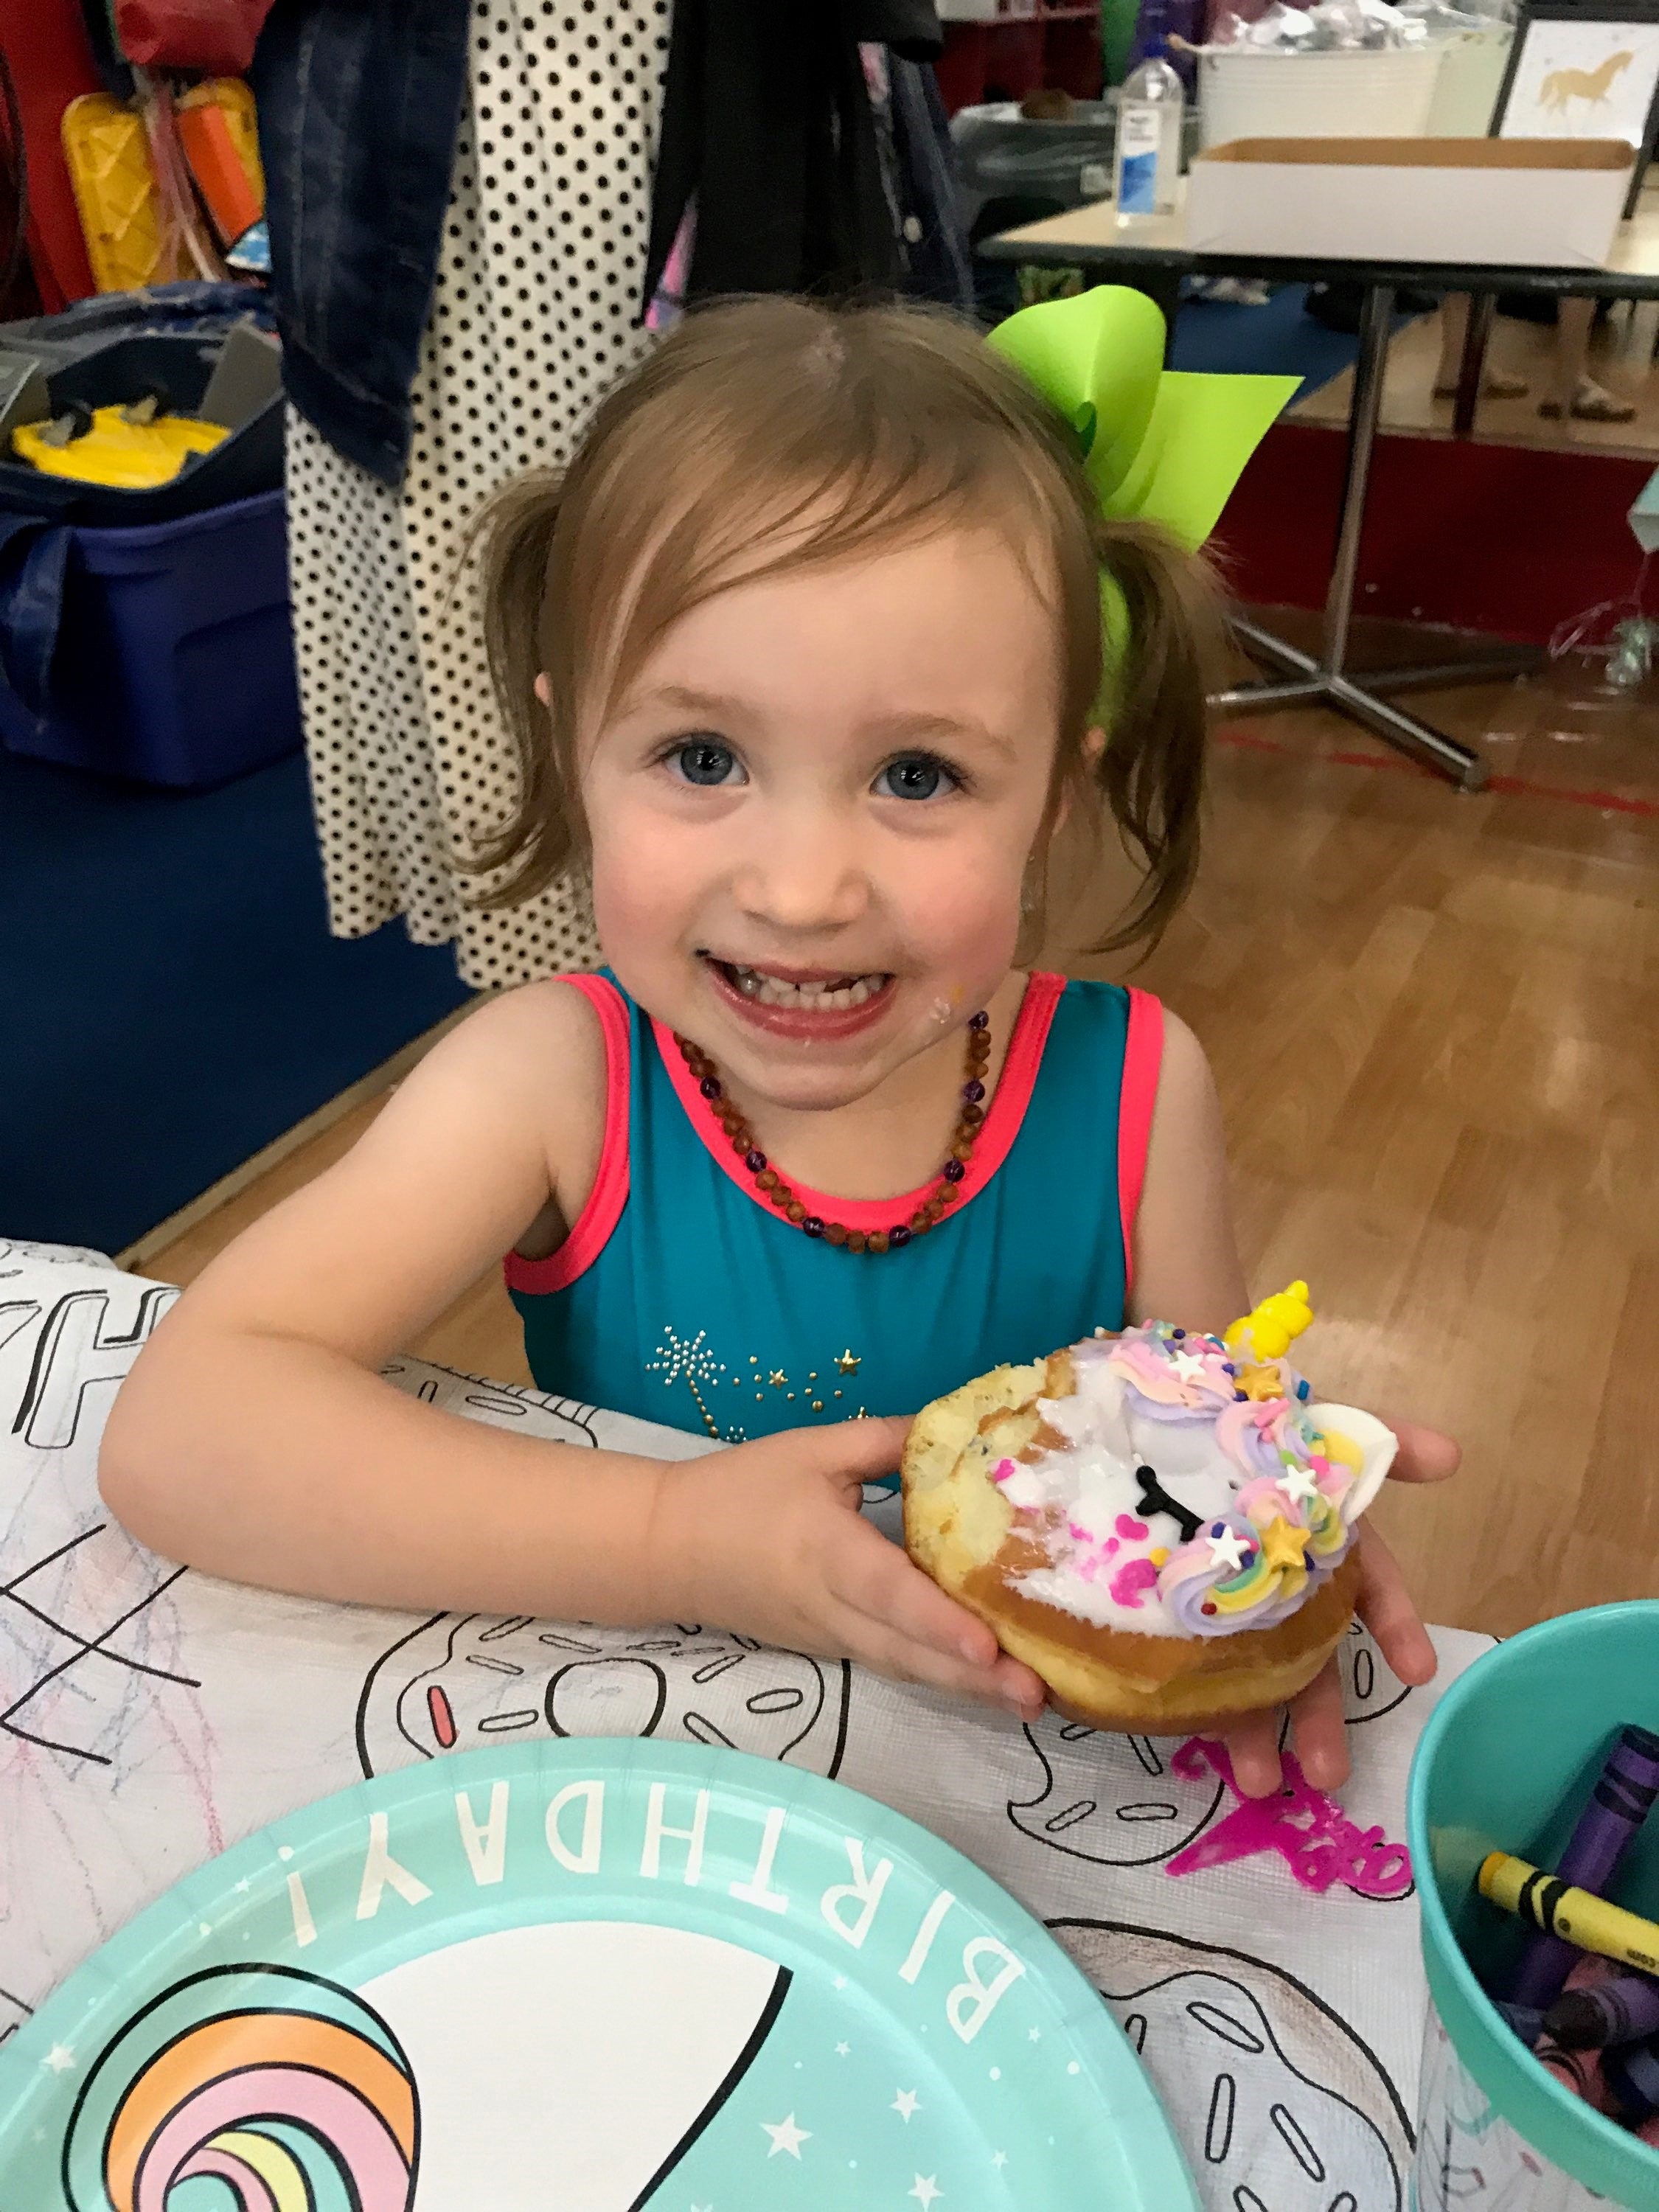 Macie Grace at the Gym enjoying a cupcake for a birthday